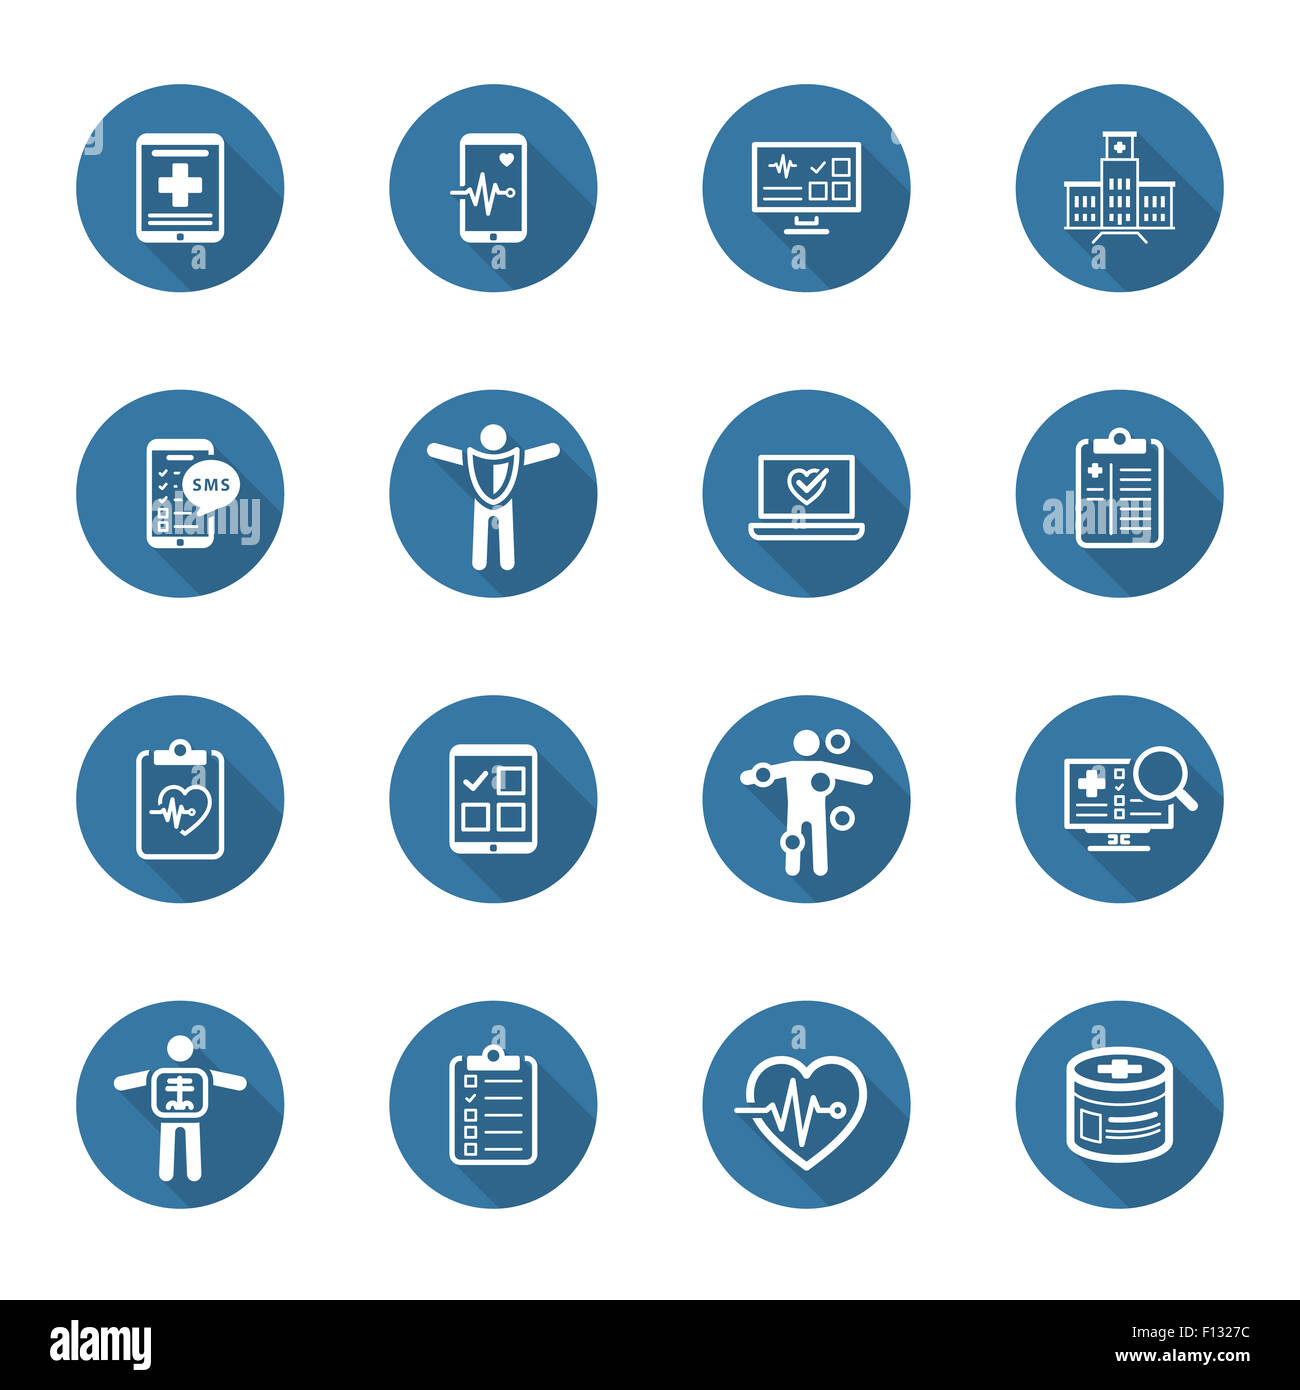 Medical & Health Care Icons Set. Flat Design. Isolated. Long Shadow. Stock Photo